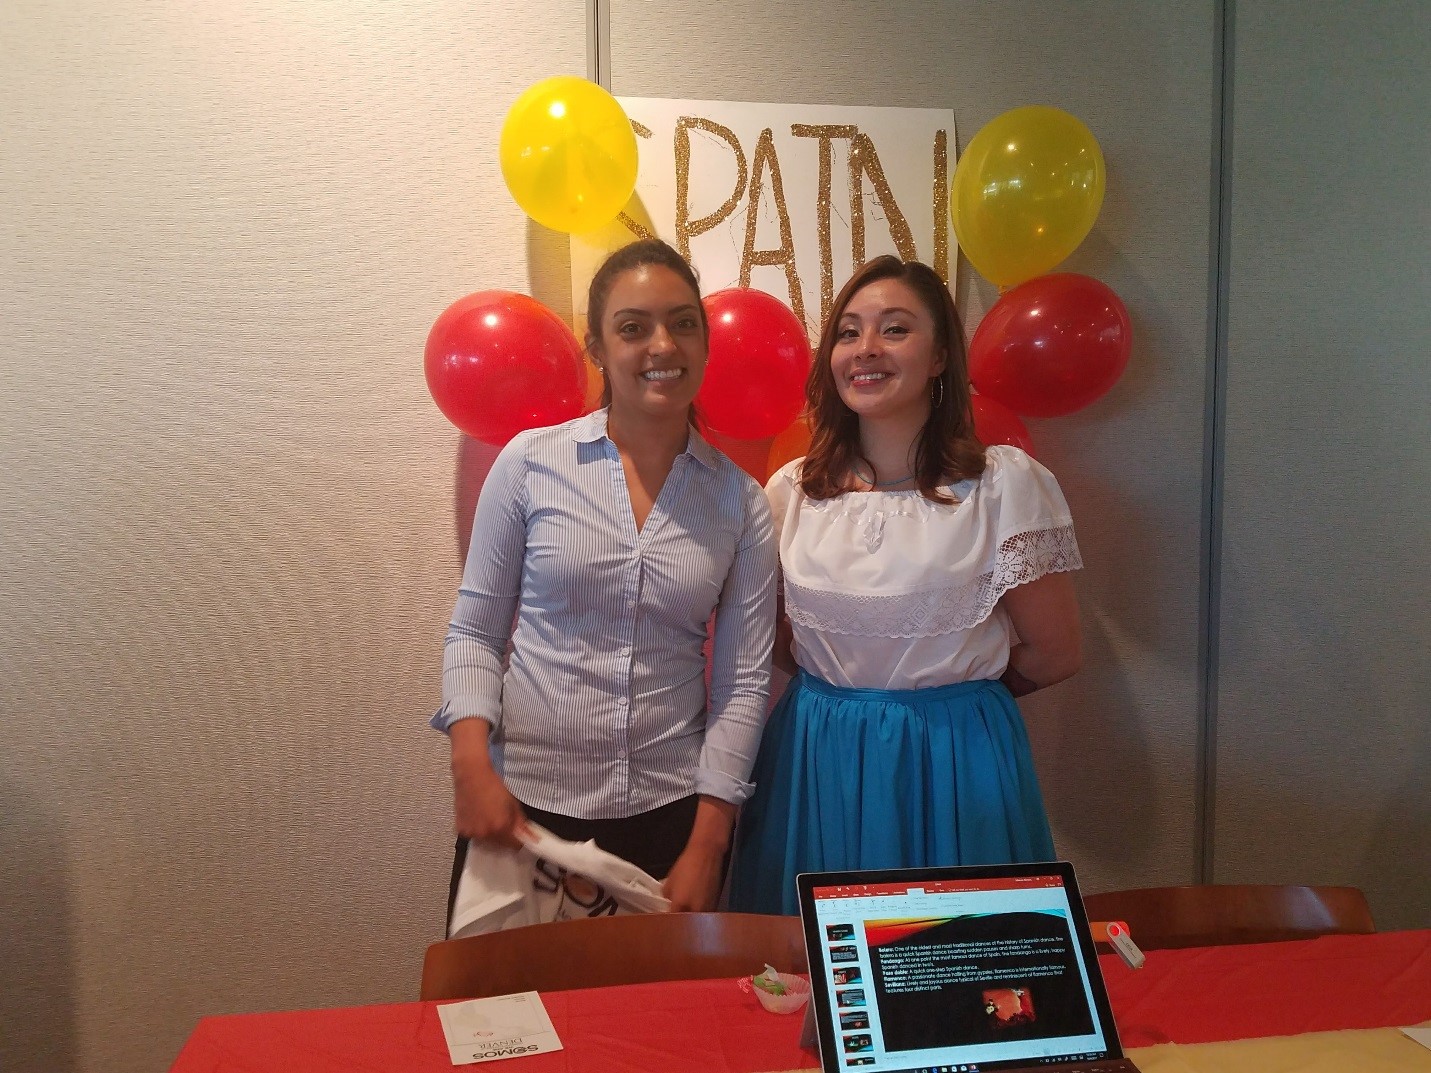 Spain was represented at the CCD Somos Event